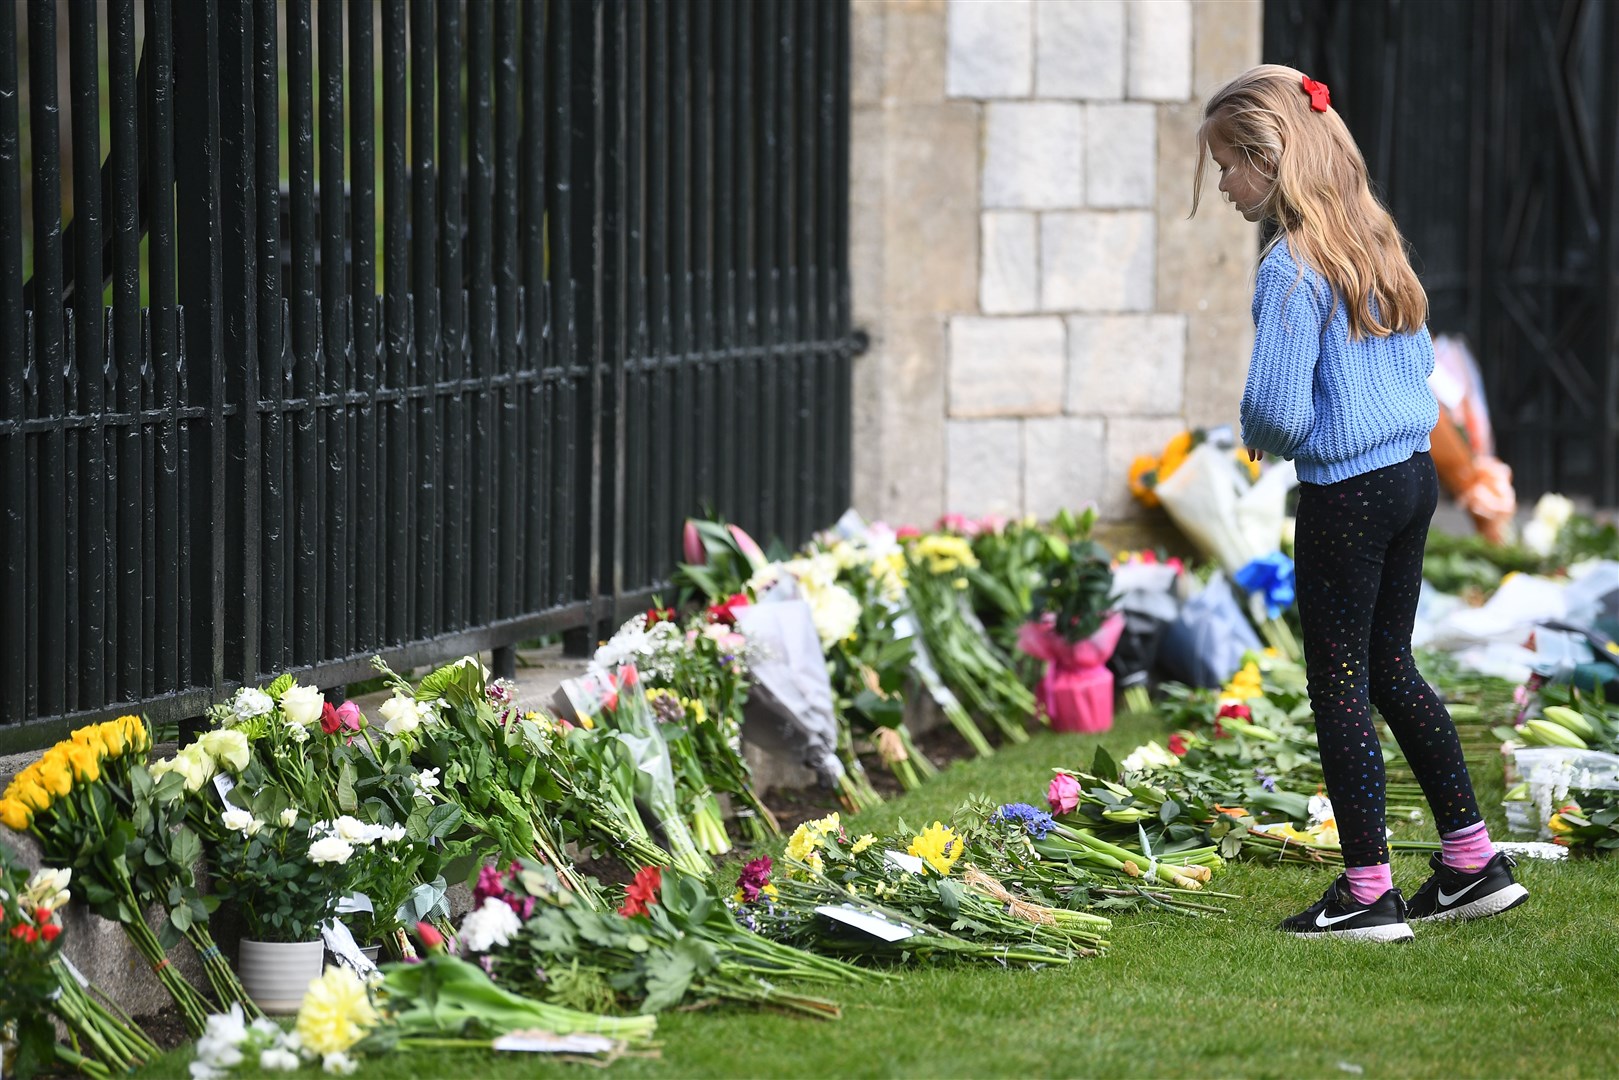 A young girl looks at flowers at Cambridge Gate at Windsor Castle, Berkshire (Victoria Jones/PA)